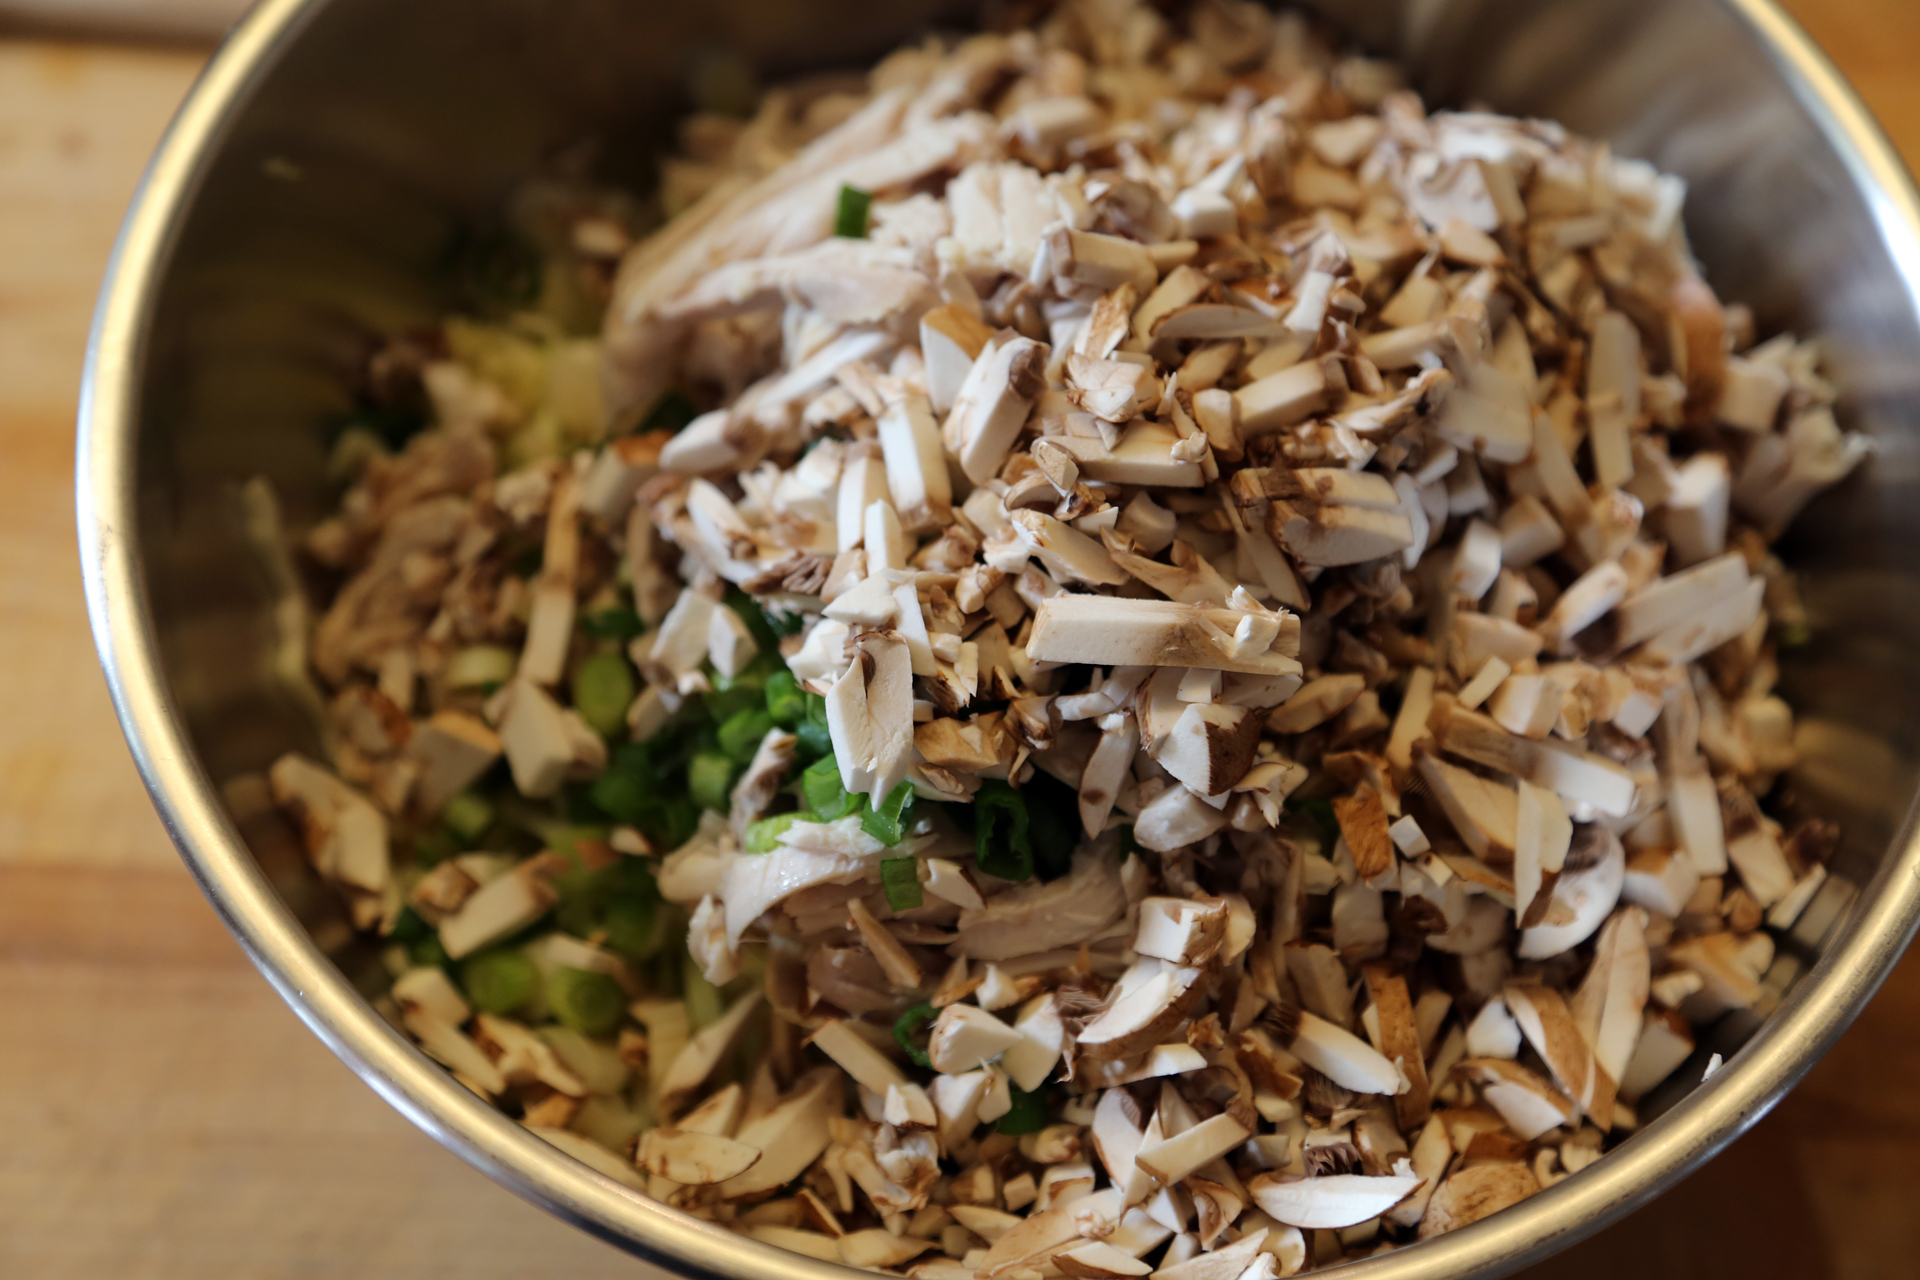 In a large mixing bowl, toss together the shredded chicken, cabbage, mushrooms, green onions, and water chestnuts.